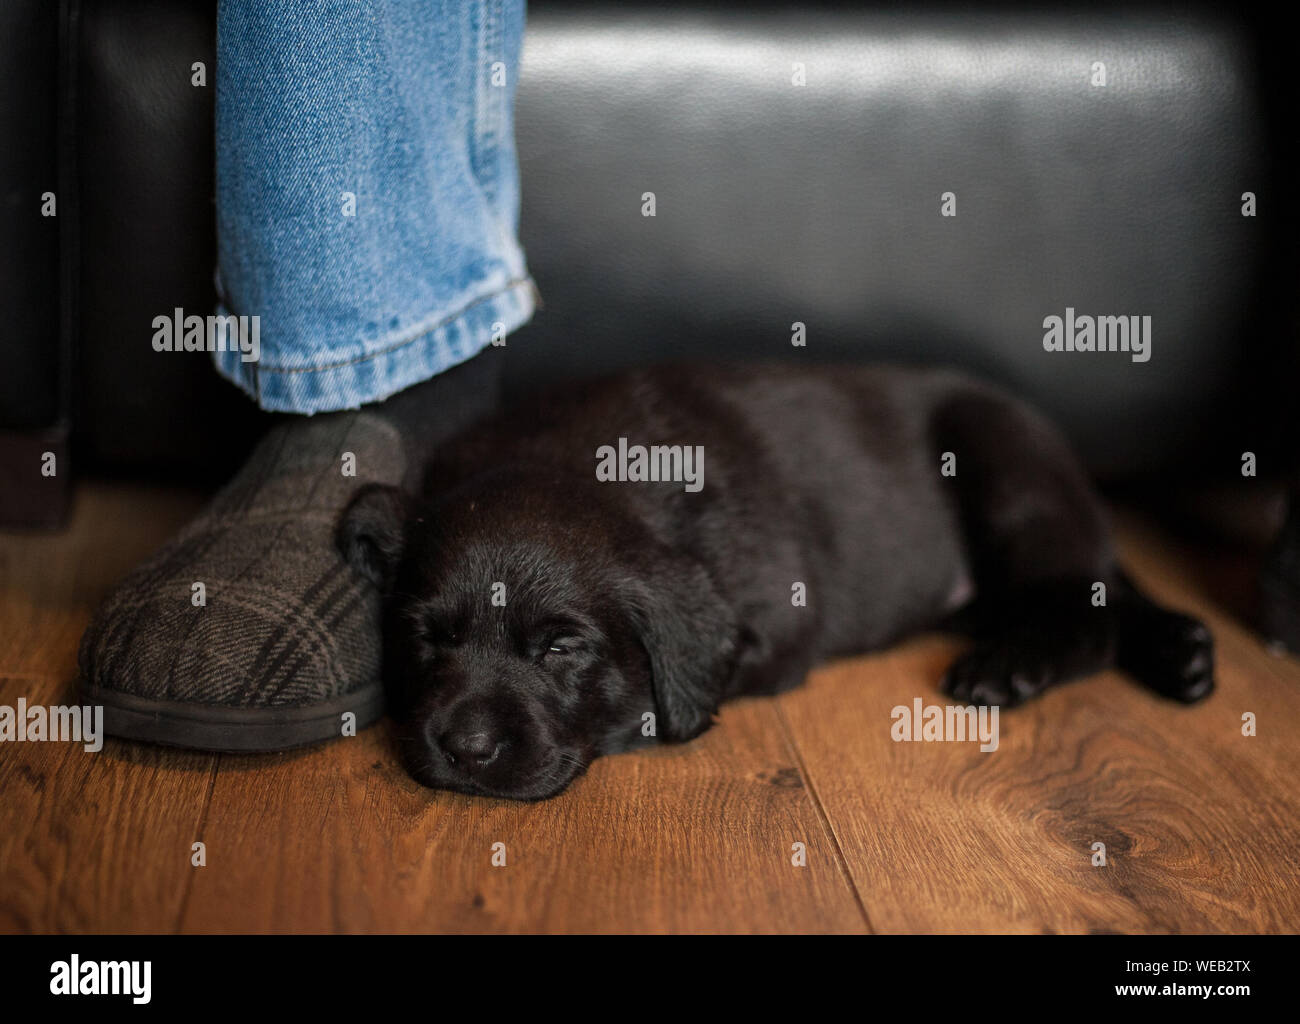 Tired puppy snoozes on its owners slipper Stock Photo